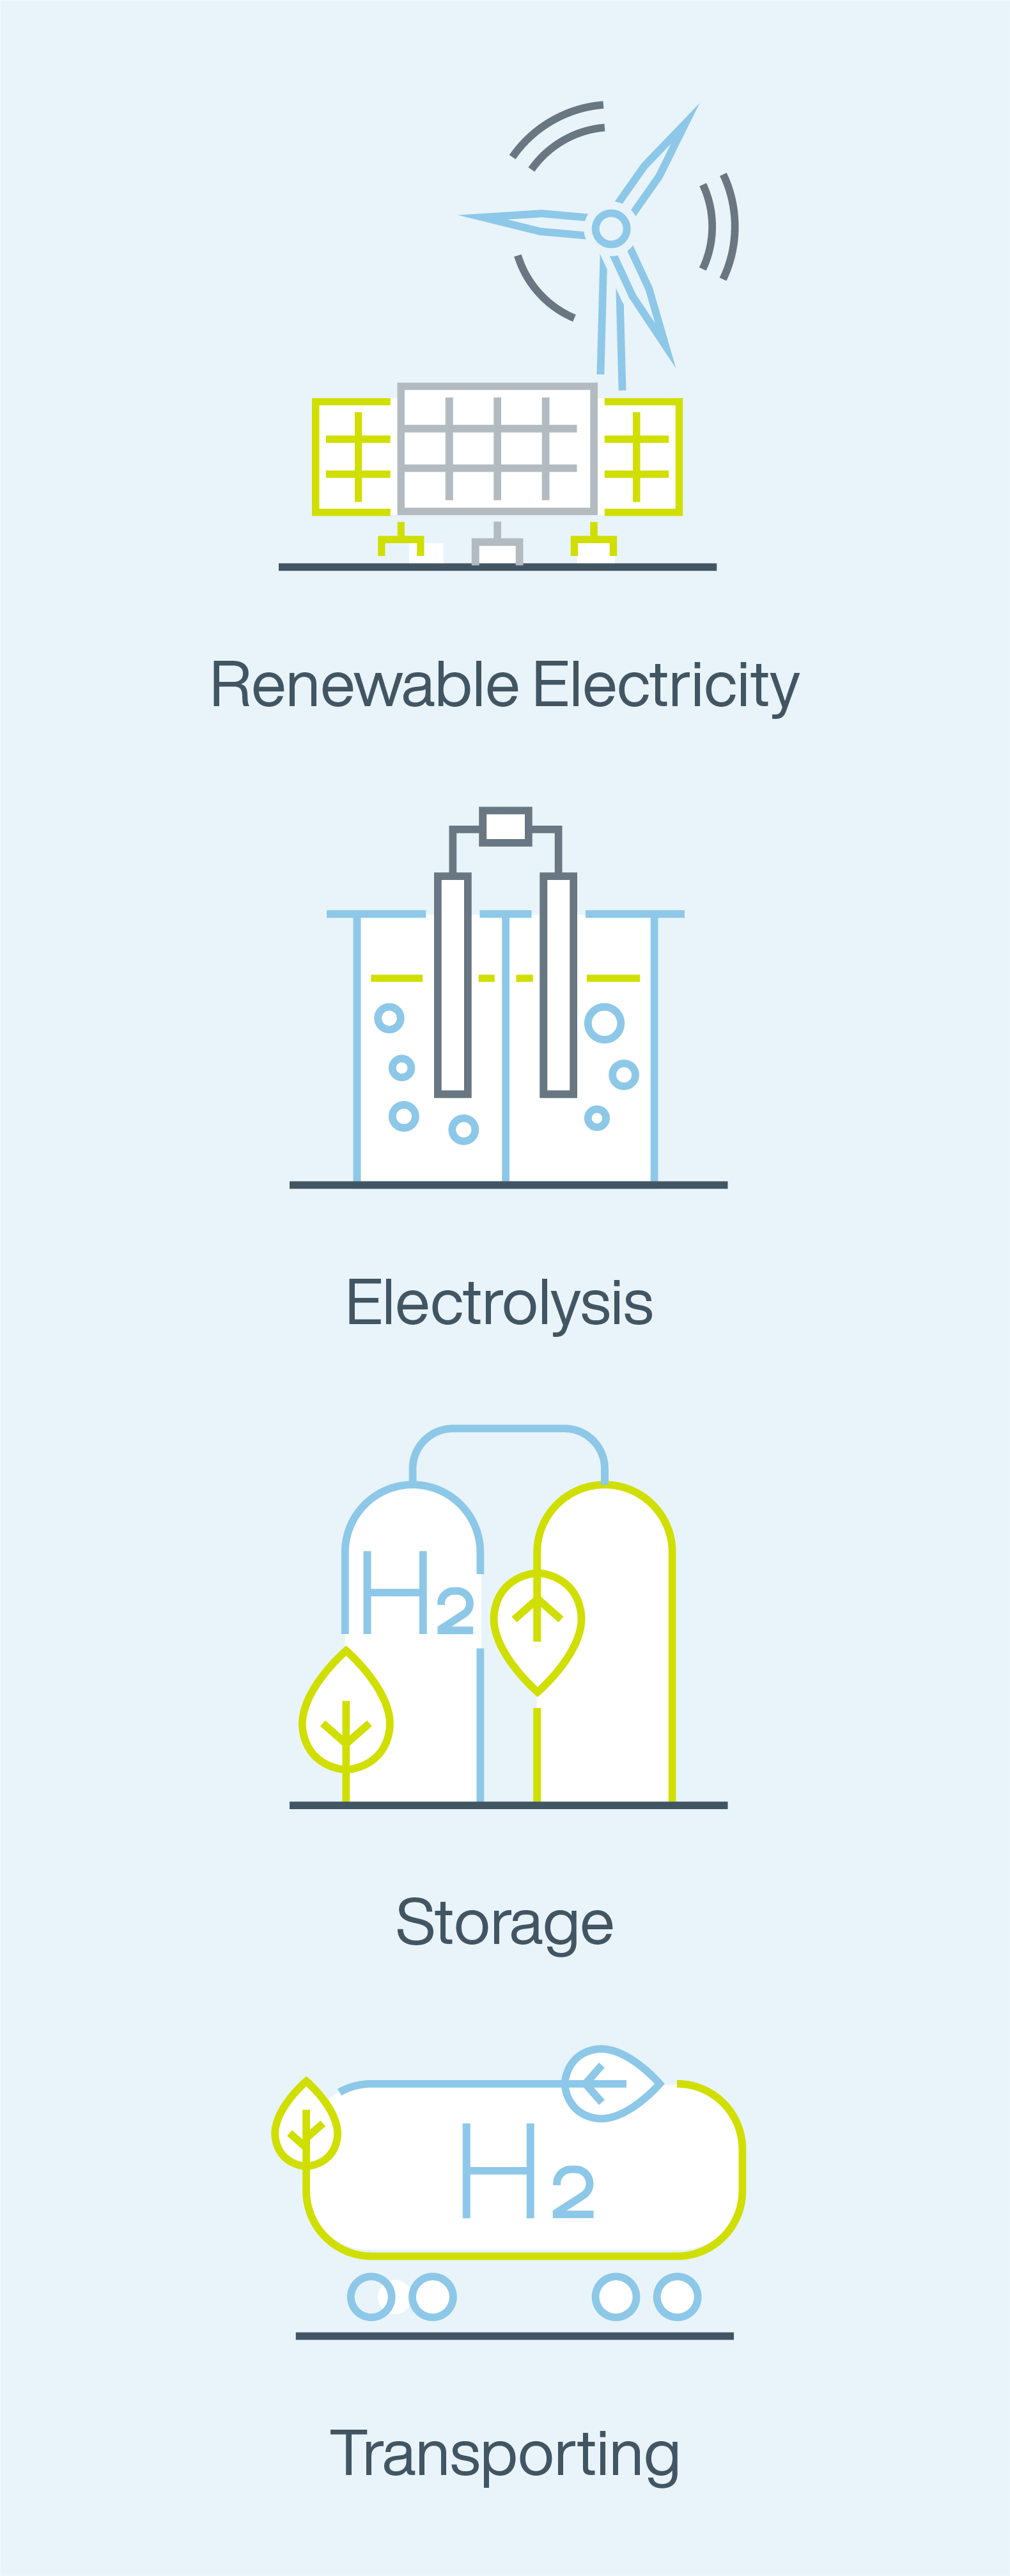 The hydrogen industry, from renewable electricity, electrolysis, to storage and transport.